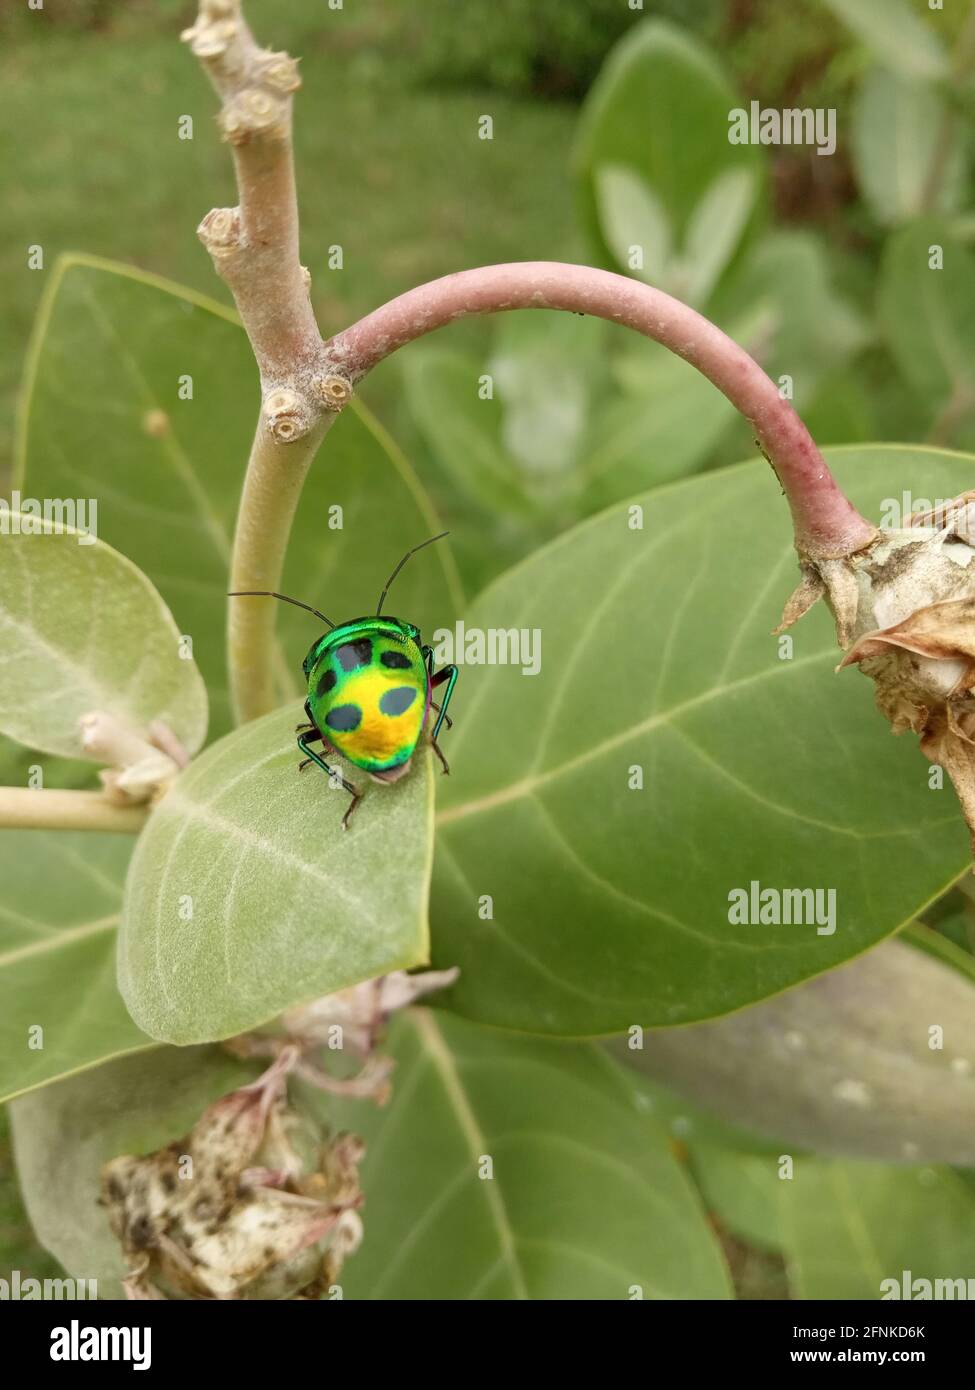 Closeup of a colorful green and yellow beetle with black spots standing on leaves in a gar Stock Photo